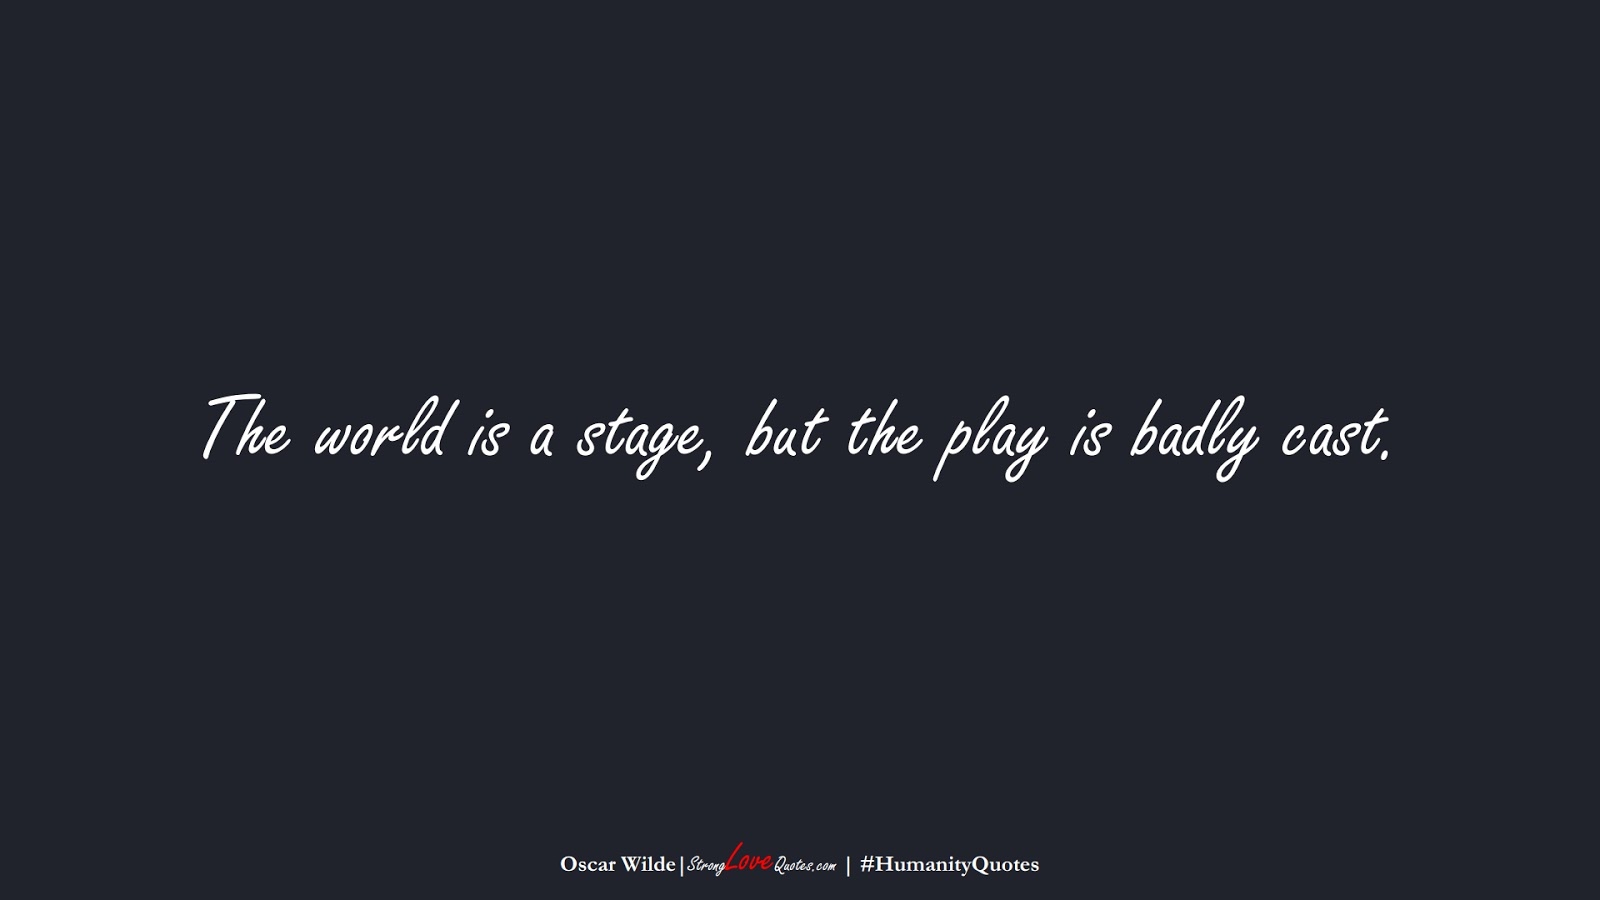 The world is a stage, but the play is badly cast. (Oscar Wilde);  #HumanityQuotes